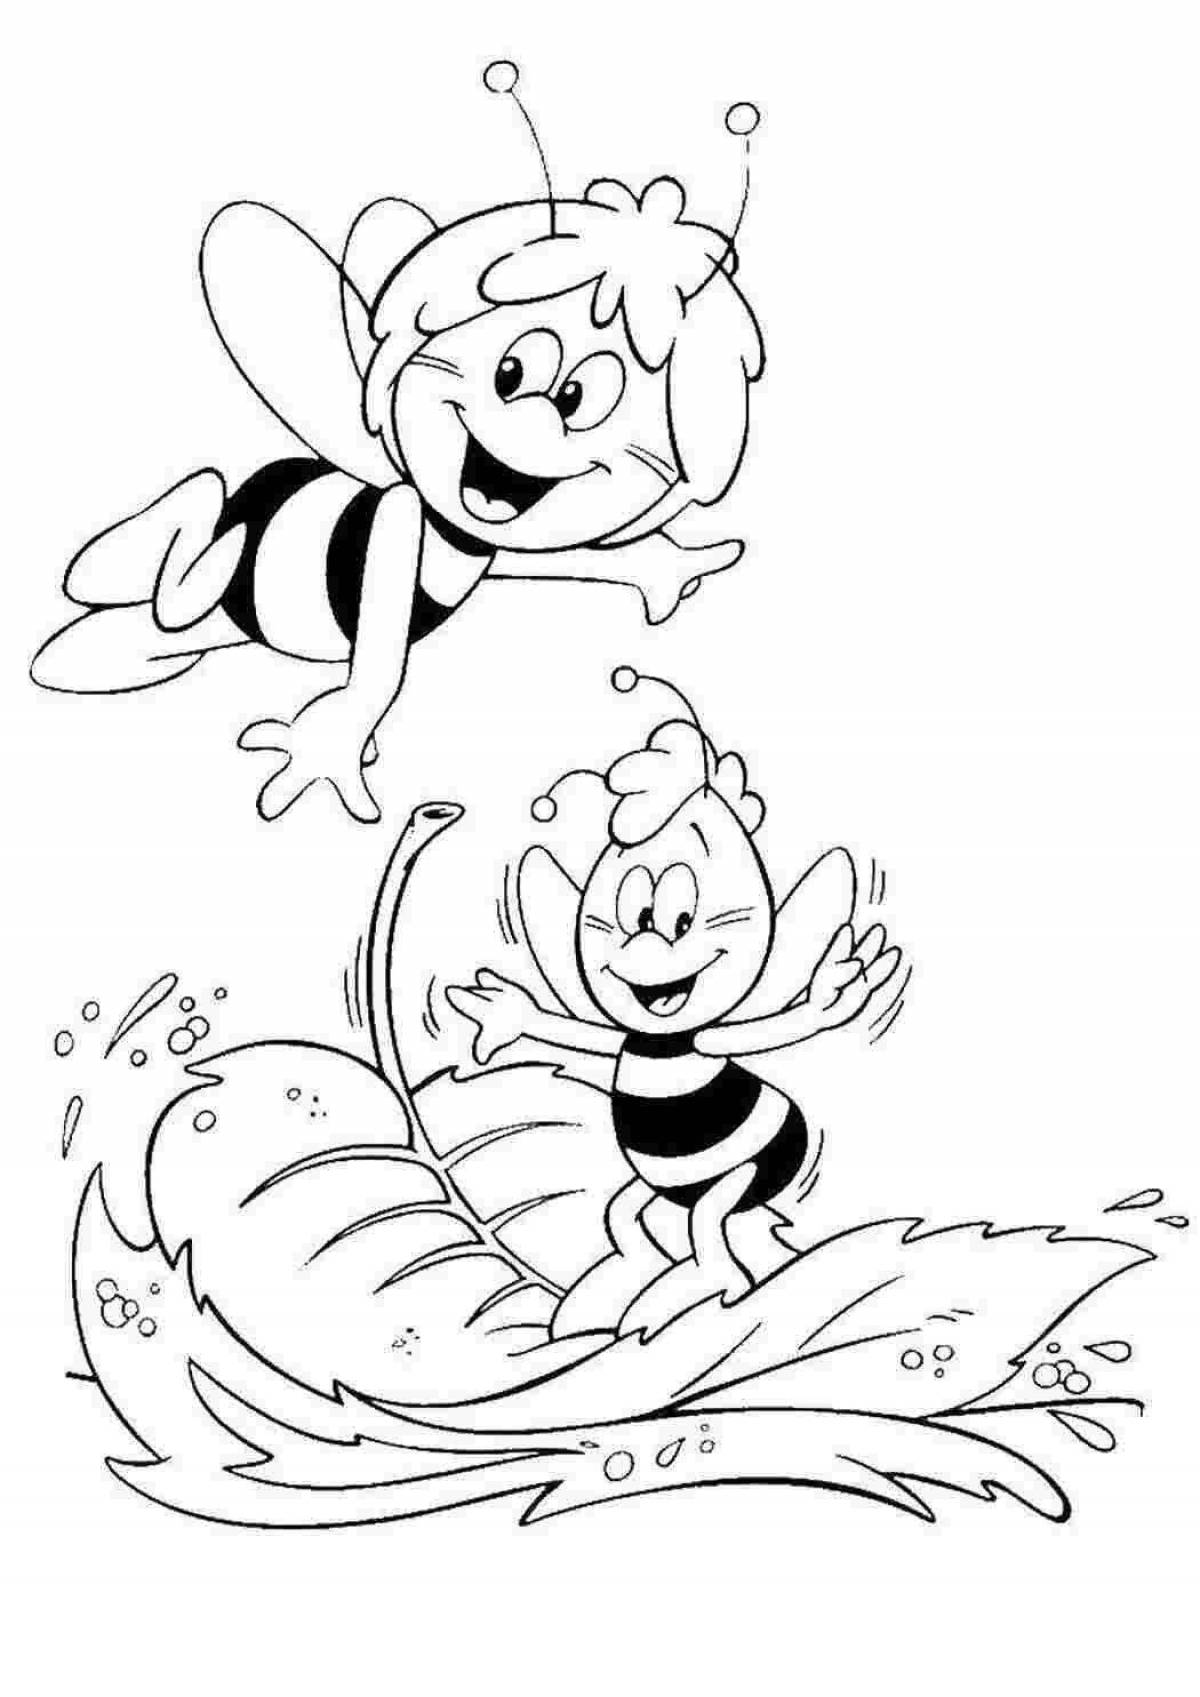 Playful bee coloring book for 3-4 year olds